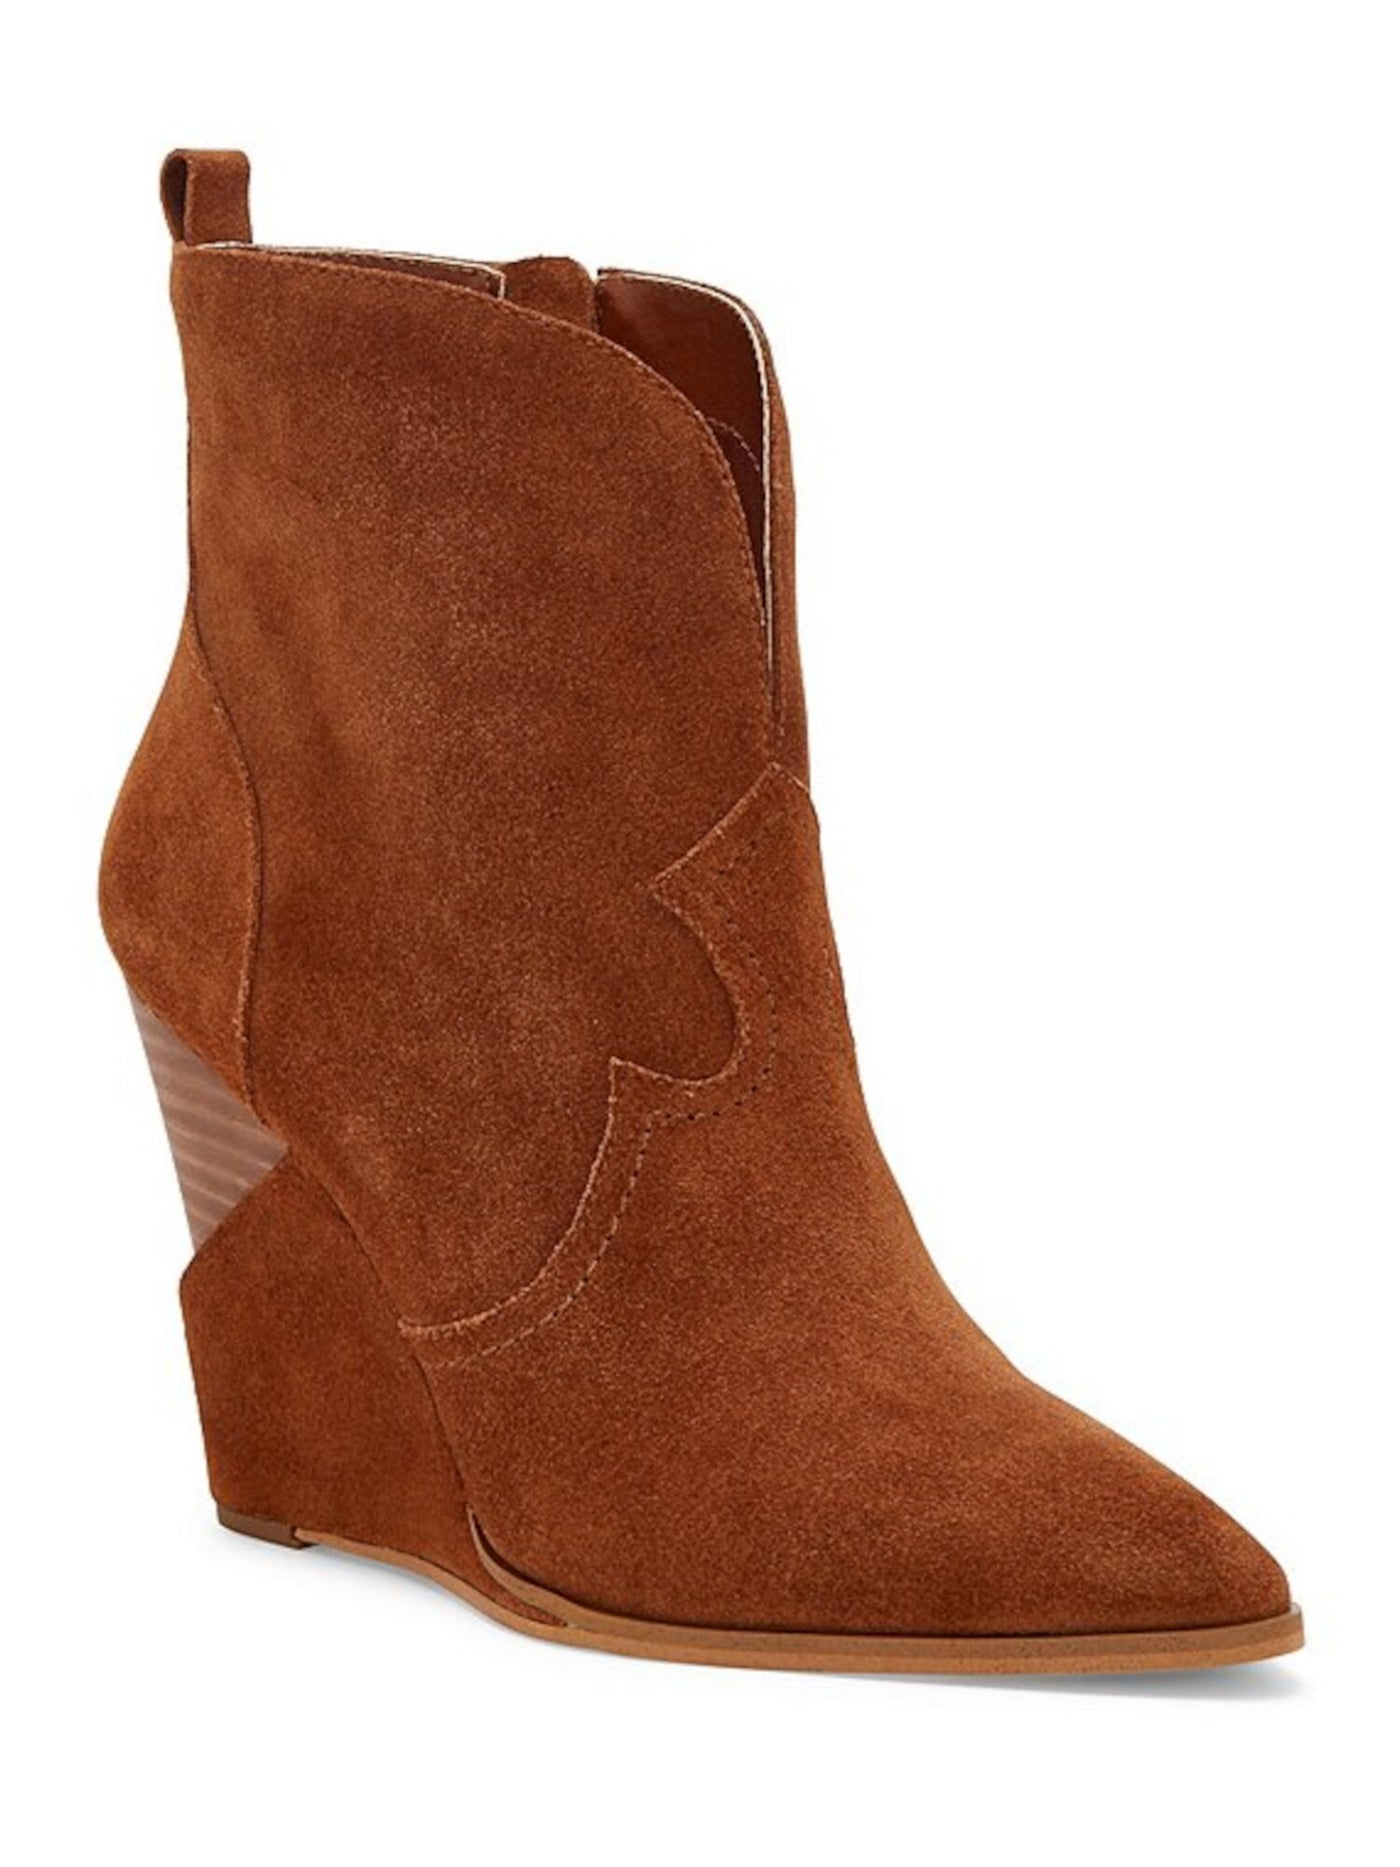 JESSICA SIMPSON Womens Brown Deep V Notch Pull Tab Comfort Hilrie Pointed Toe Wedge Zip-Up Leather Booties 8.5 M